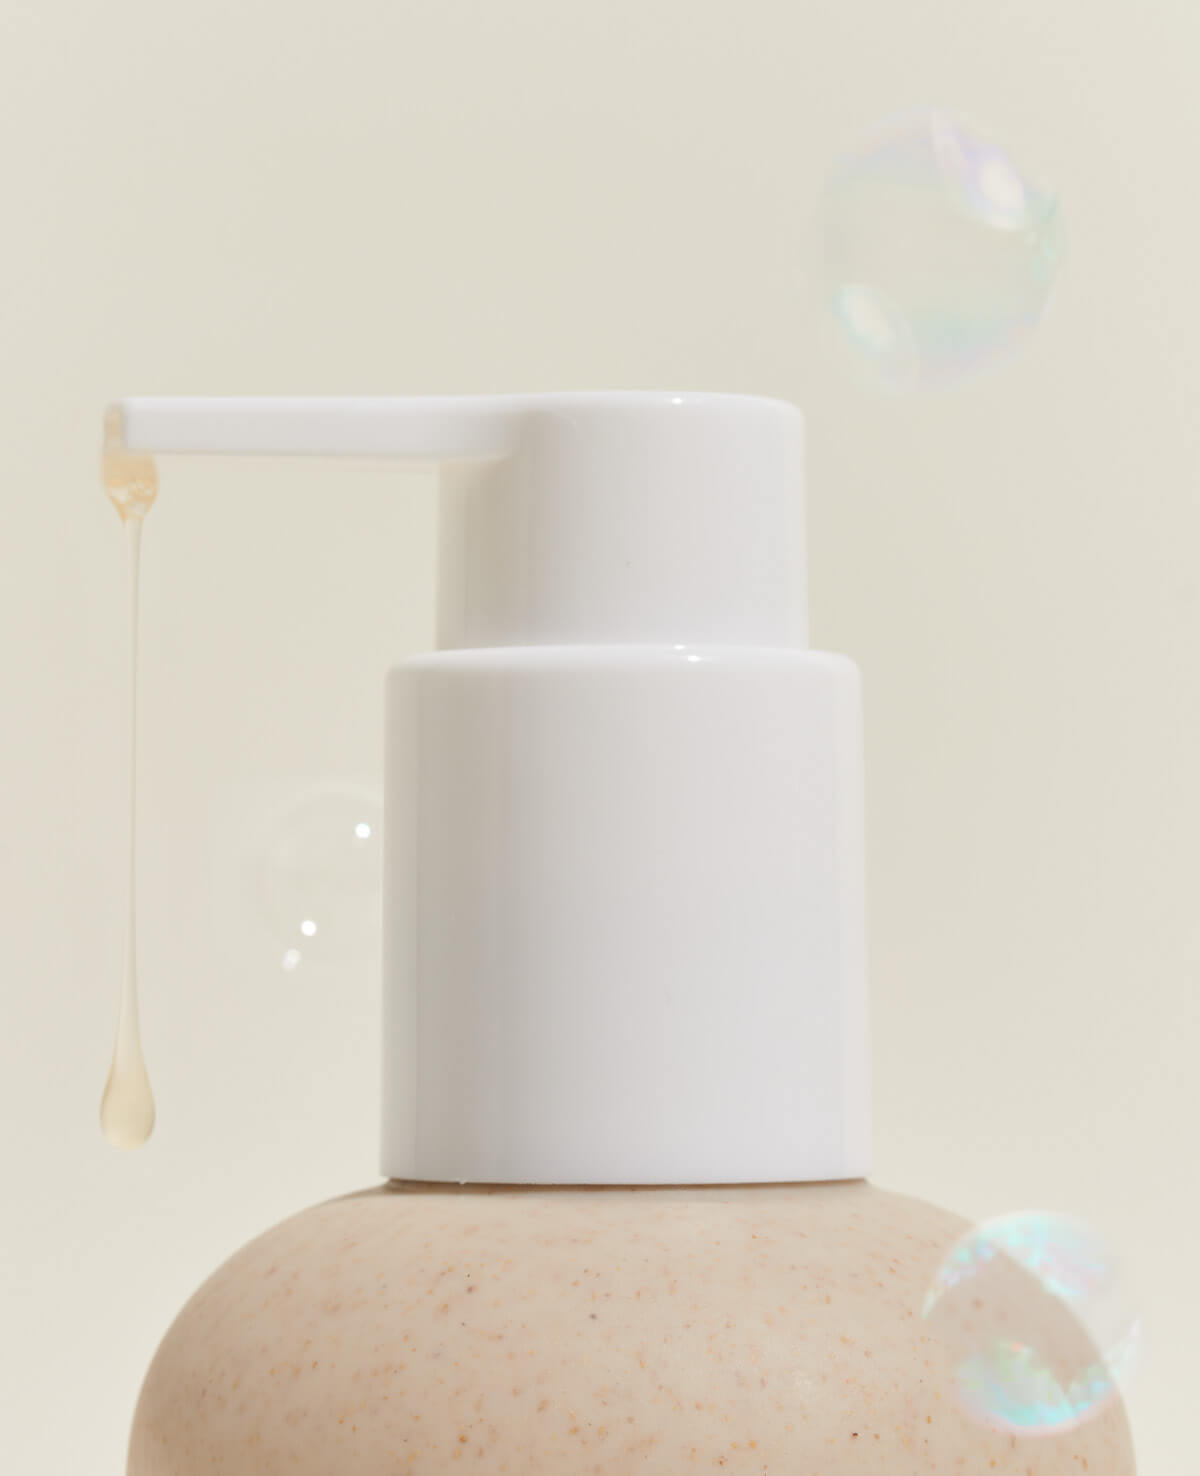 A soap bottle surrounded by soap bubbles, creating a playful and refreshing image.